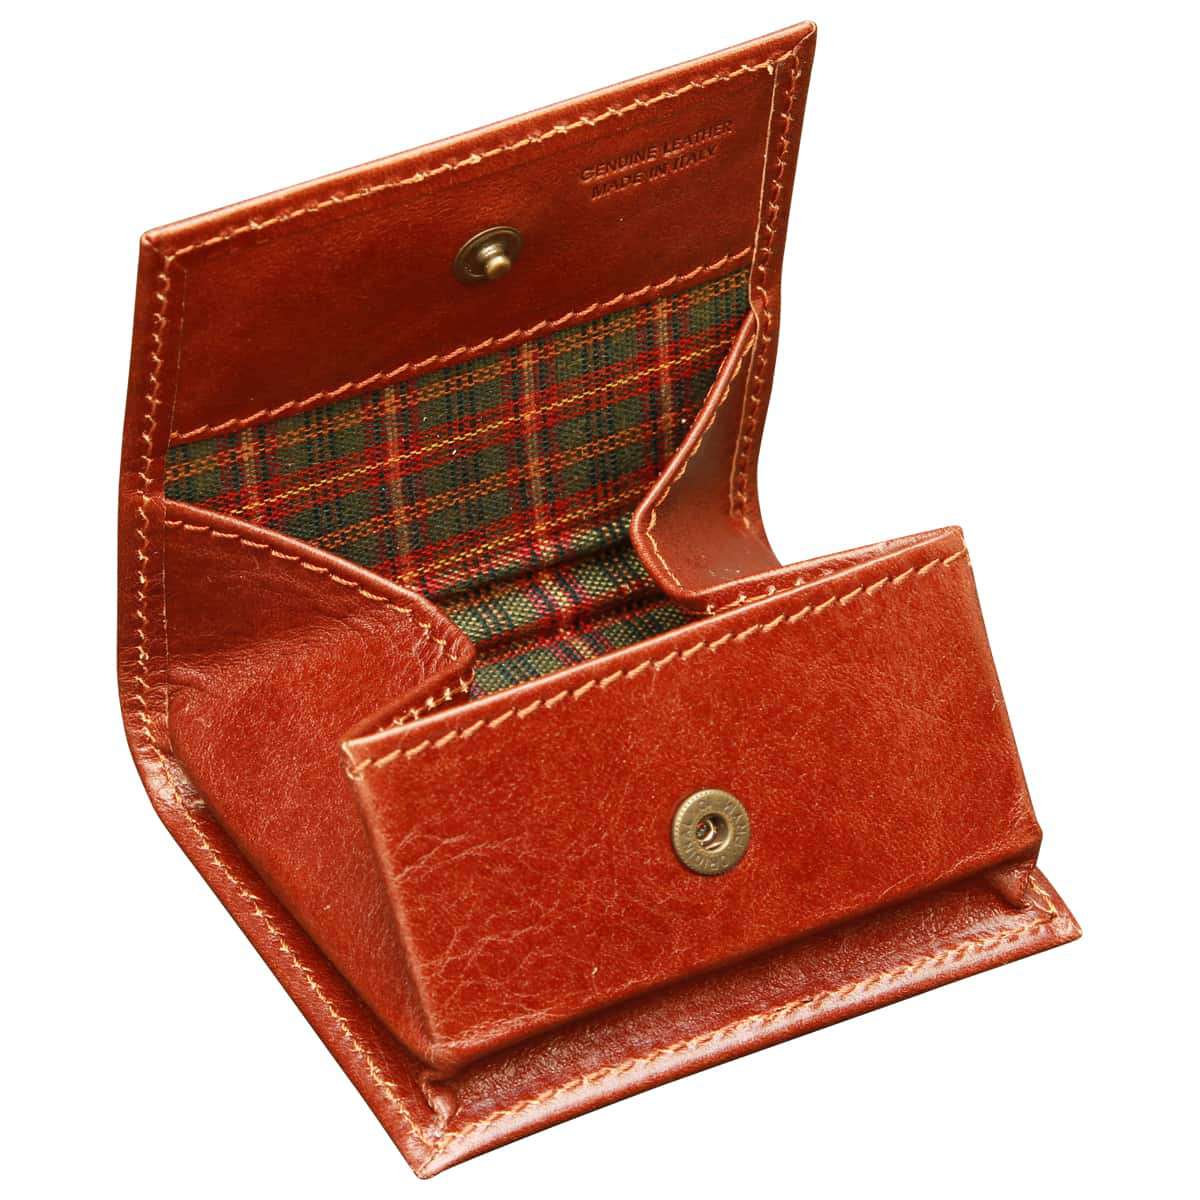 Leather Coin Purse - Brown | 806605MA UK | Old Angler Firenze